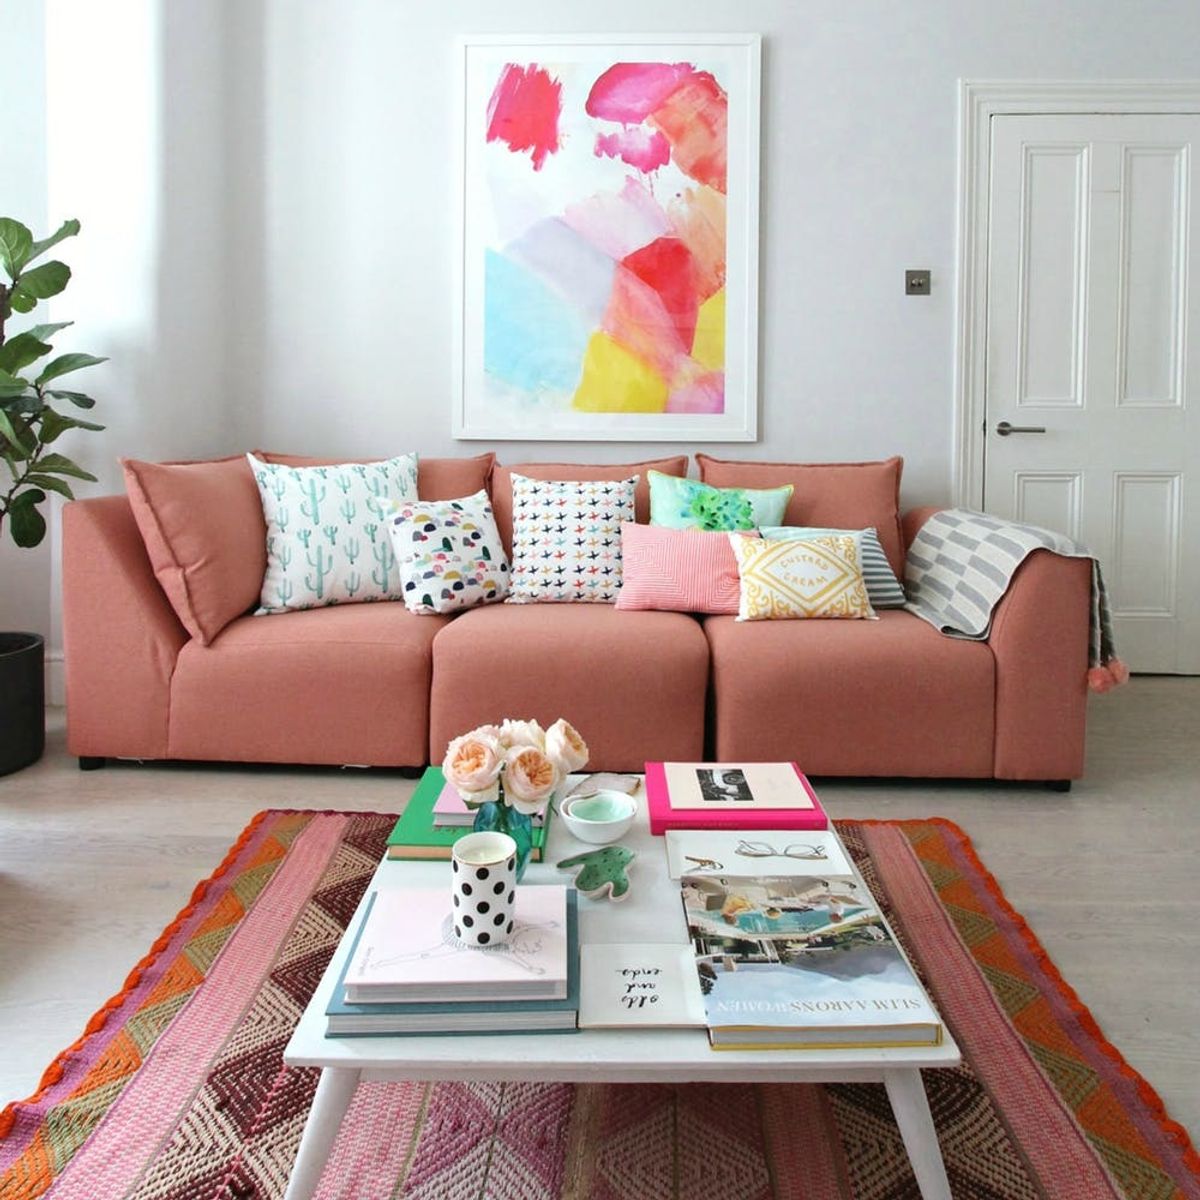 This London Blogger’s Instagram Is a Must-Follow for Color Lovers